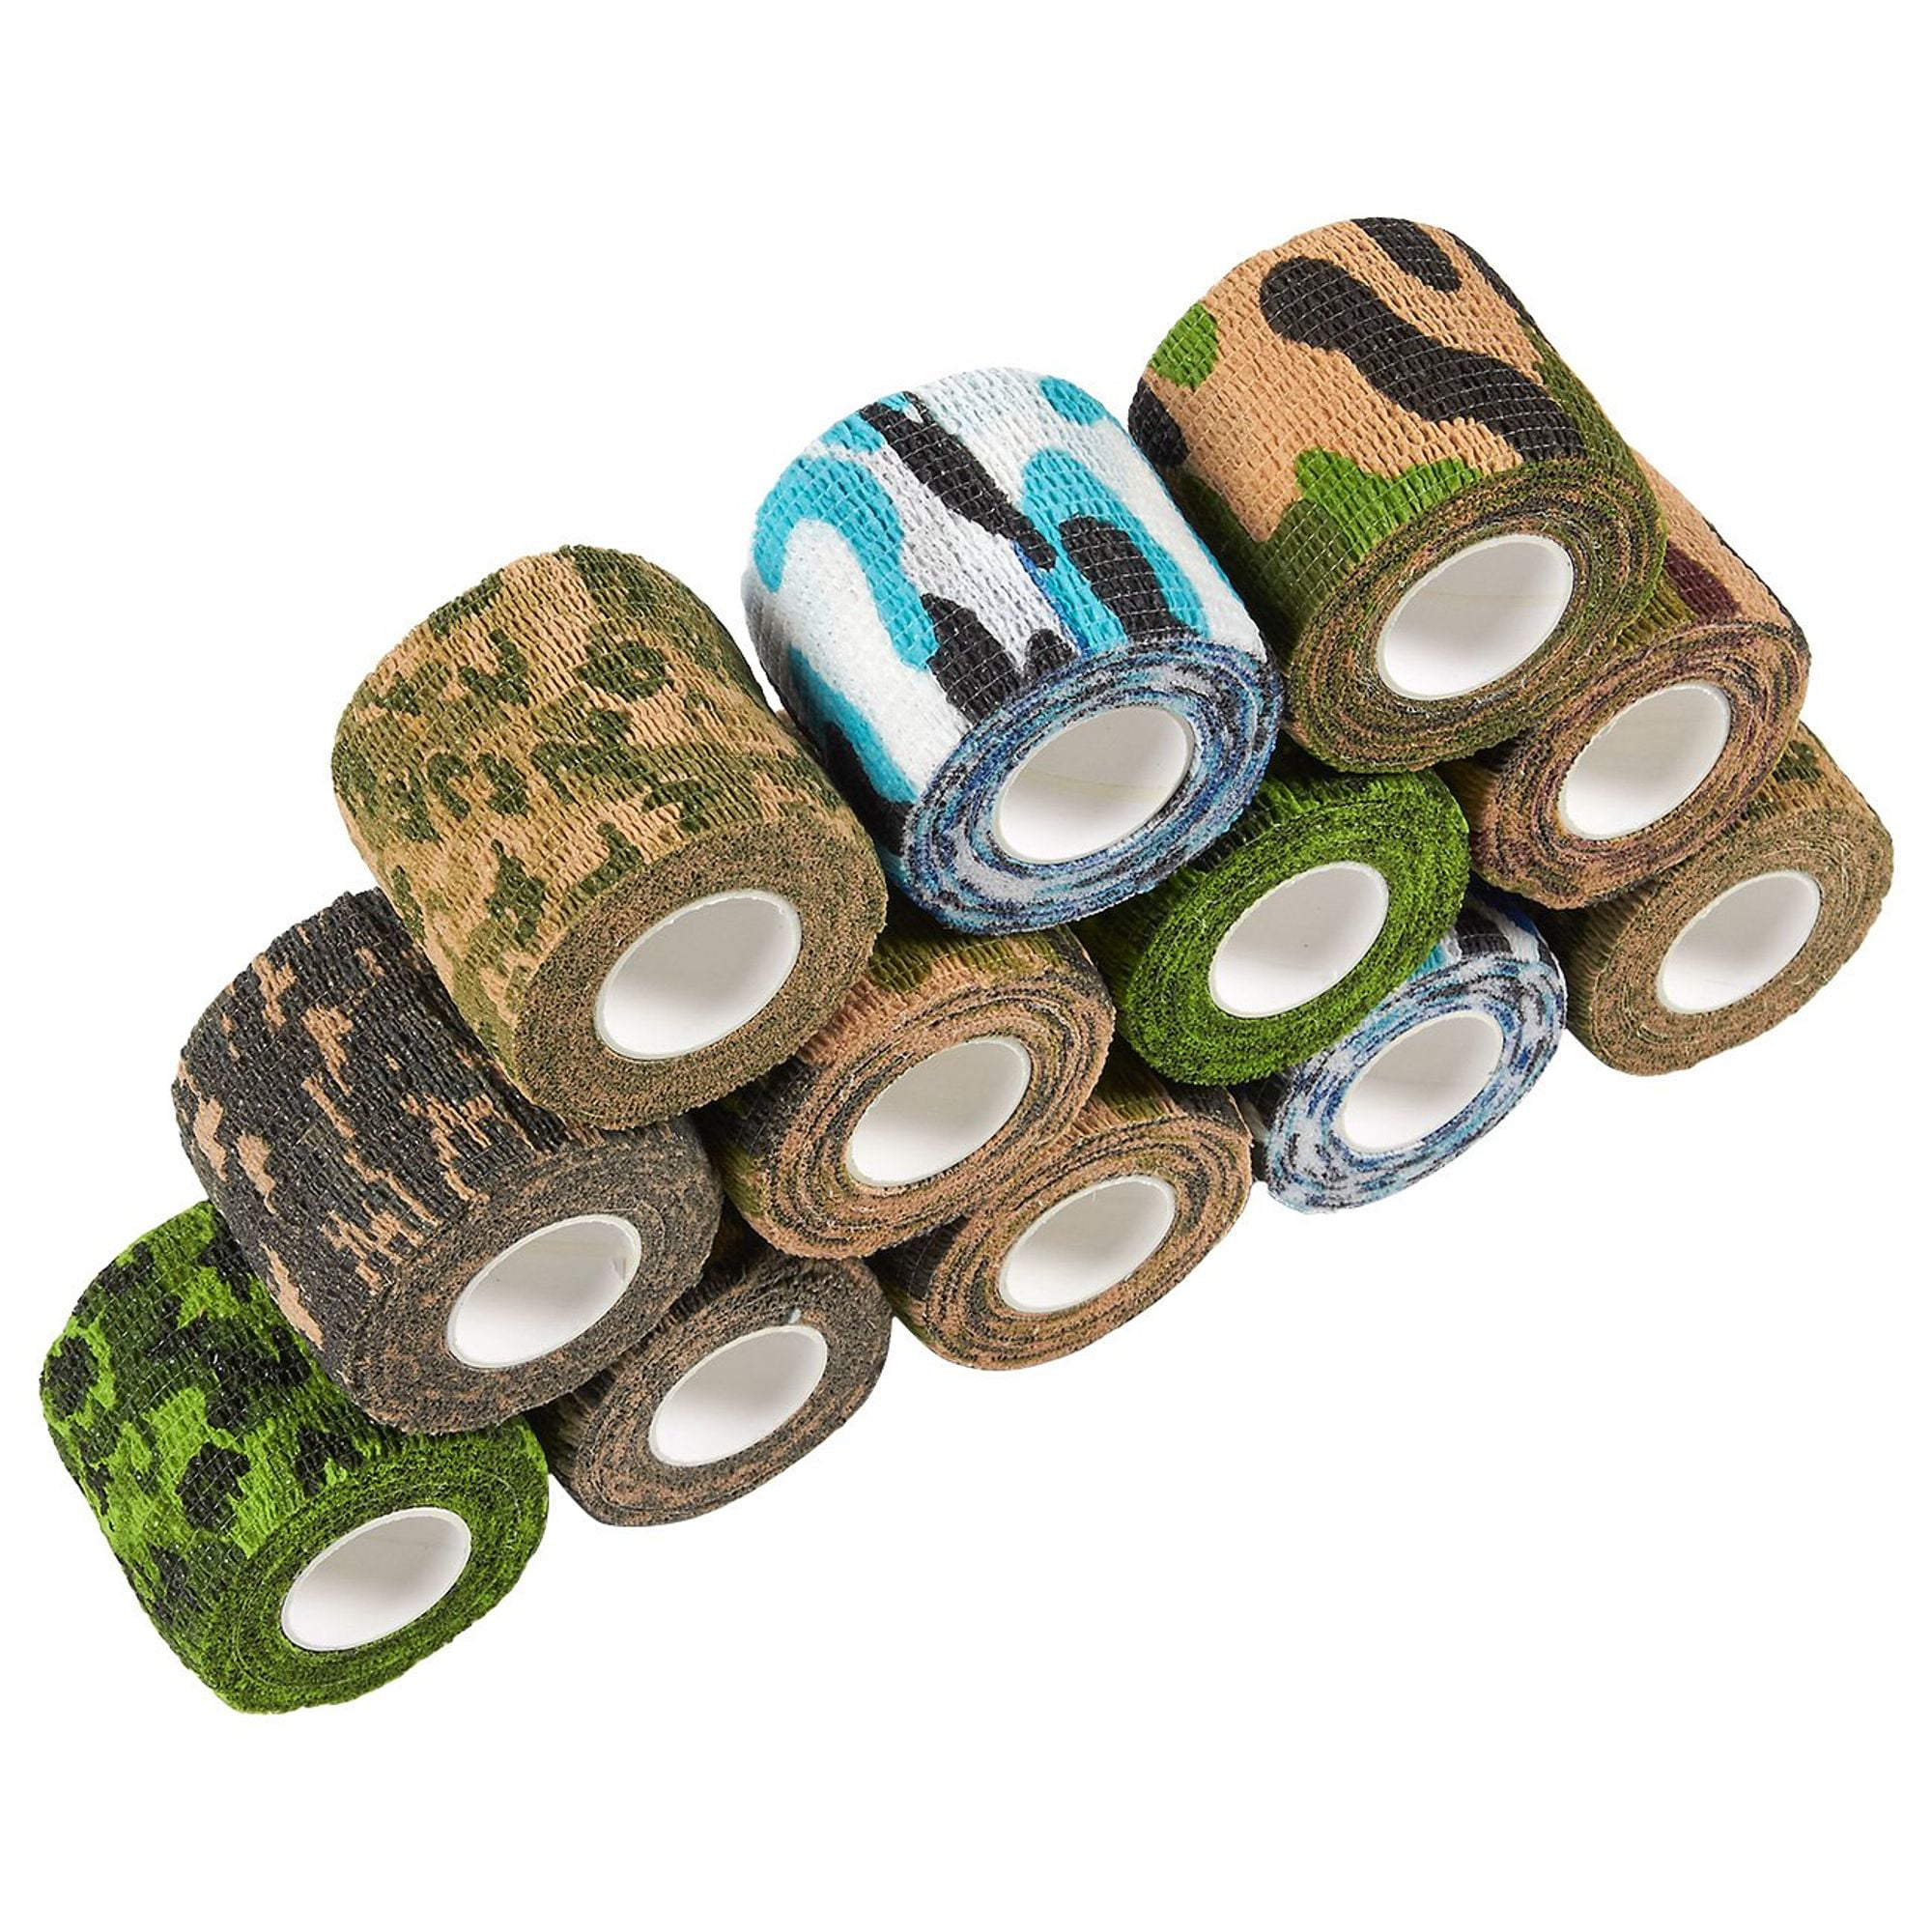 Vet Wrap Tape Self Adhesive Cohesive Bandage 4 2 Rolls, Pink 12 or 24 Pack Camo Camouflage Colors Dog Cat Horse Self Stick Adherent Rap Tape 4 inch x 5 Yards 2 6 